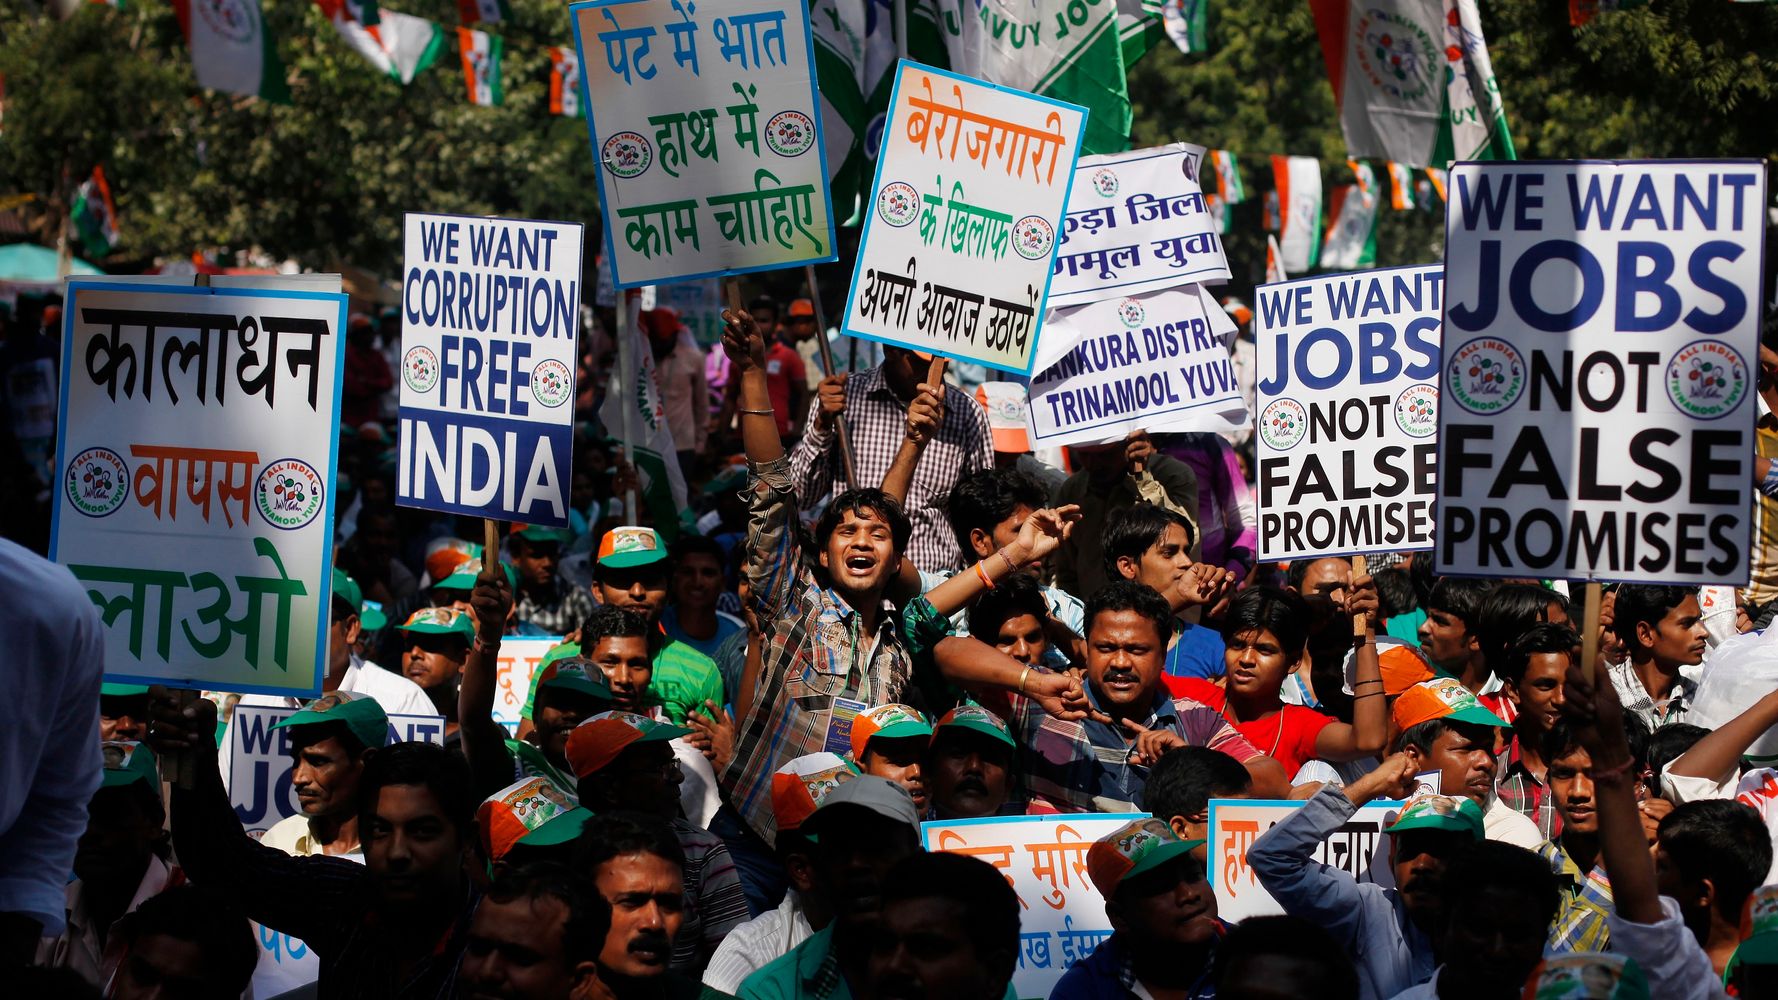 50 Lakh Men Lost Their Jobs After Demonetisation: Report | HuffPost null